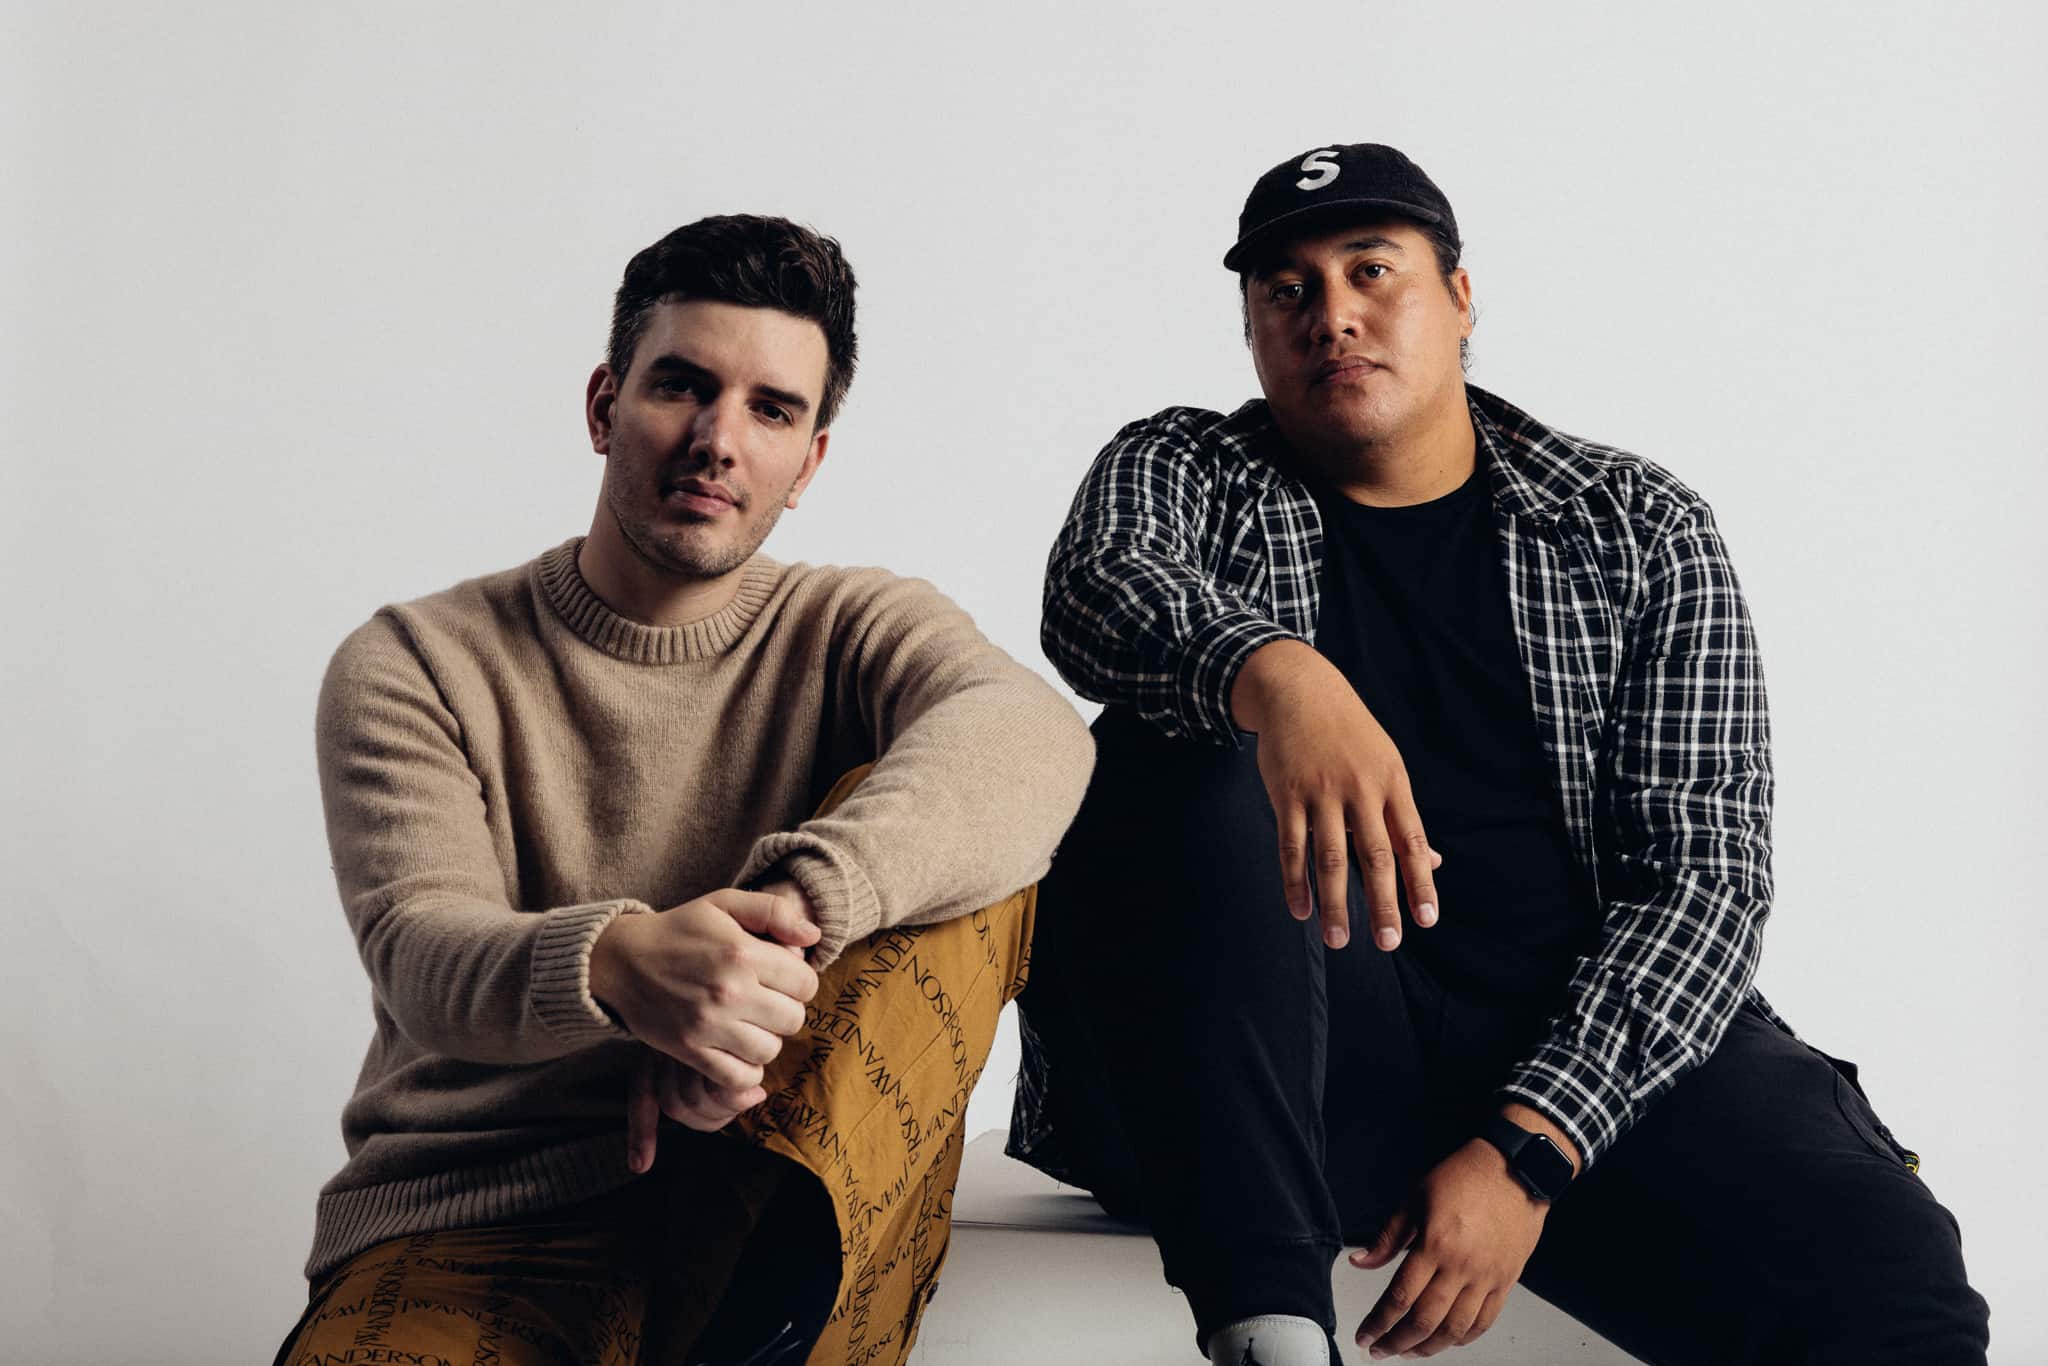 Netsky and Montell2099 join forces once again for 'Broken': Listen